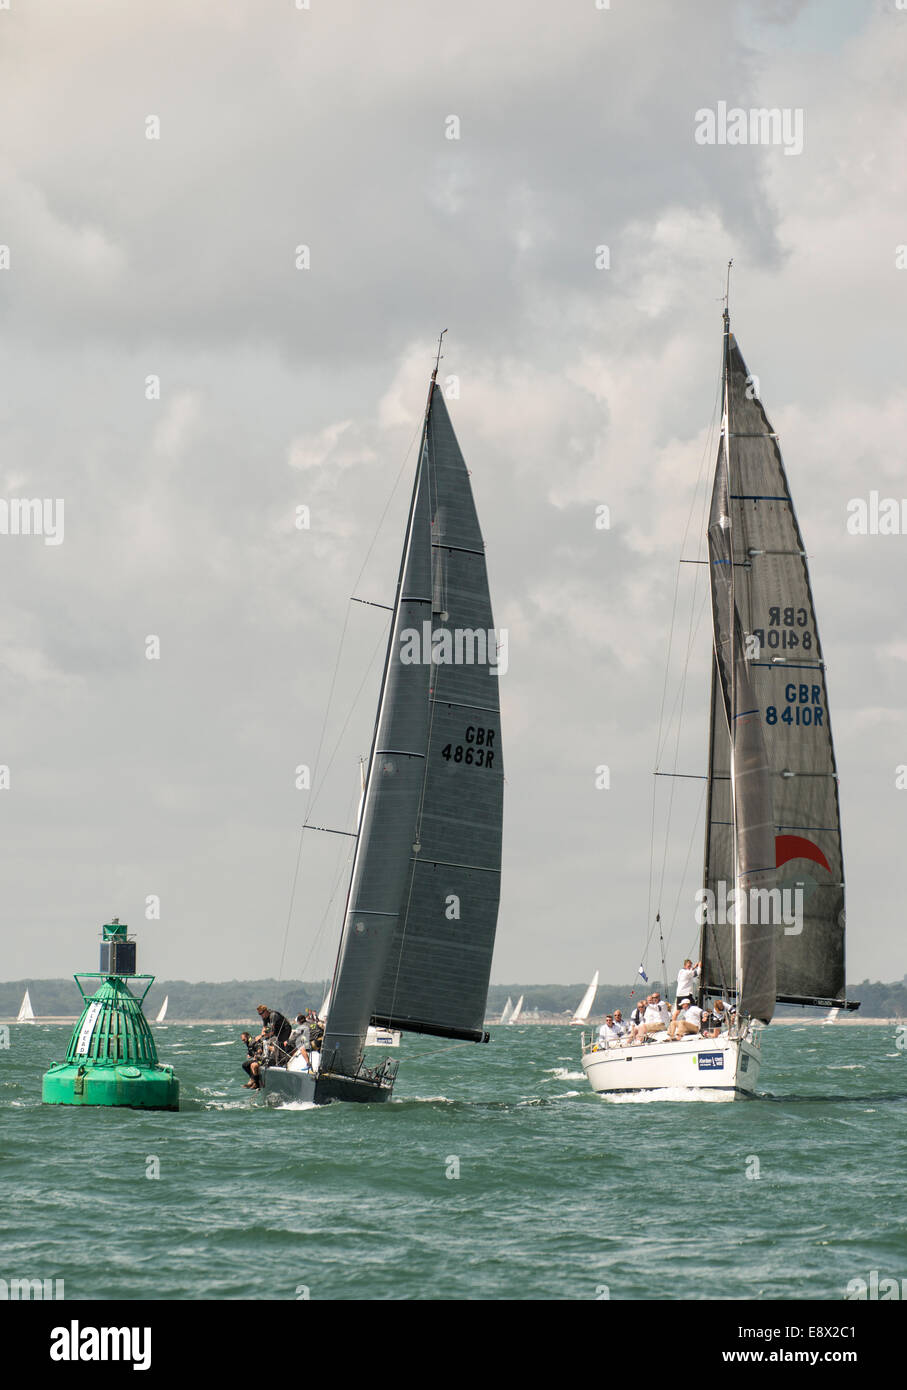 Racing Yacht Yes! a Corby 36 sail number GBR4863R  rounds the Salt Mead Buoy ahead of GBR8410R and Elan 410 during Cowes Week Stock Photo